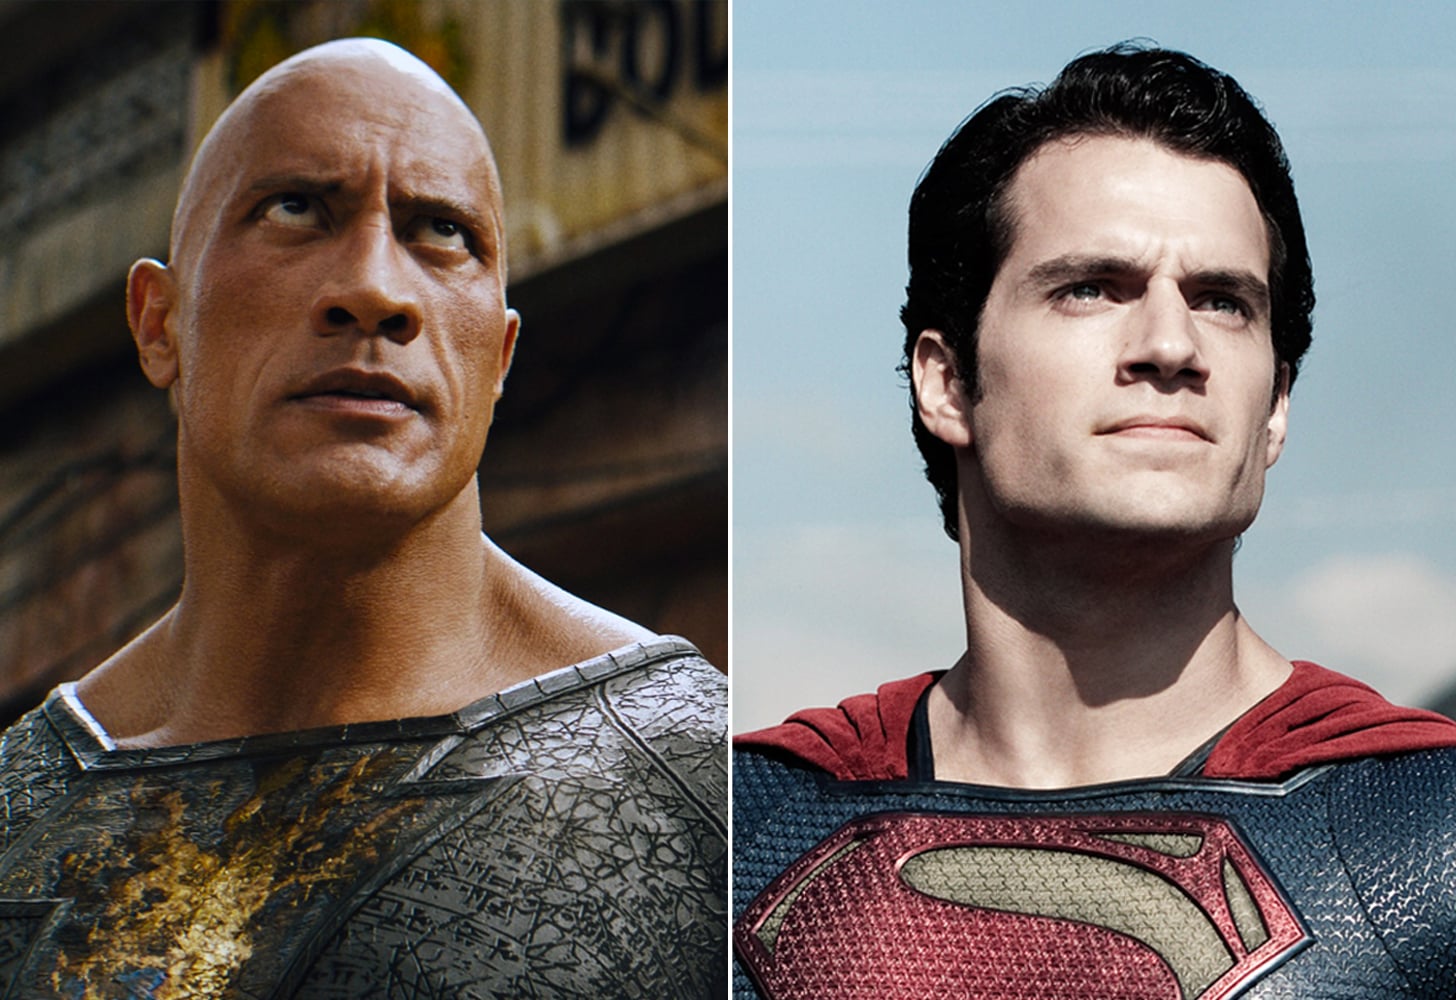 Dwayne Johnson Reveals He Had to Fight For Henry Cavill’s Return as Superman: “Years in the Making”